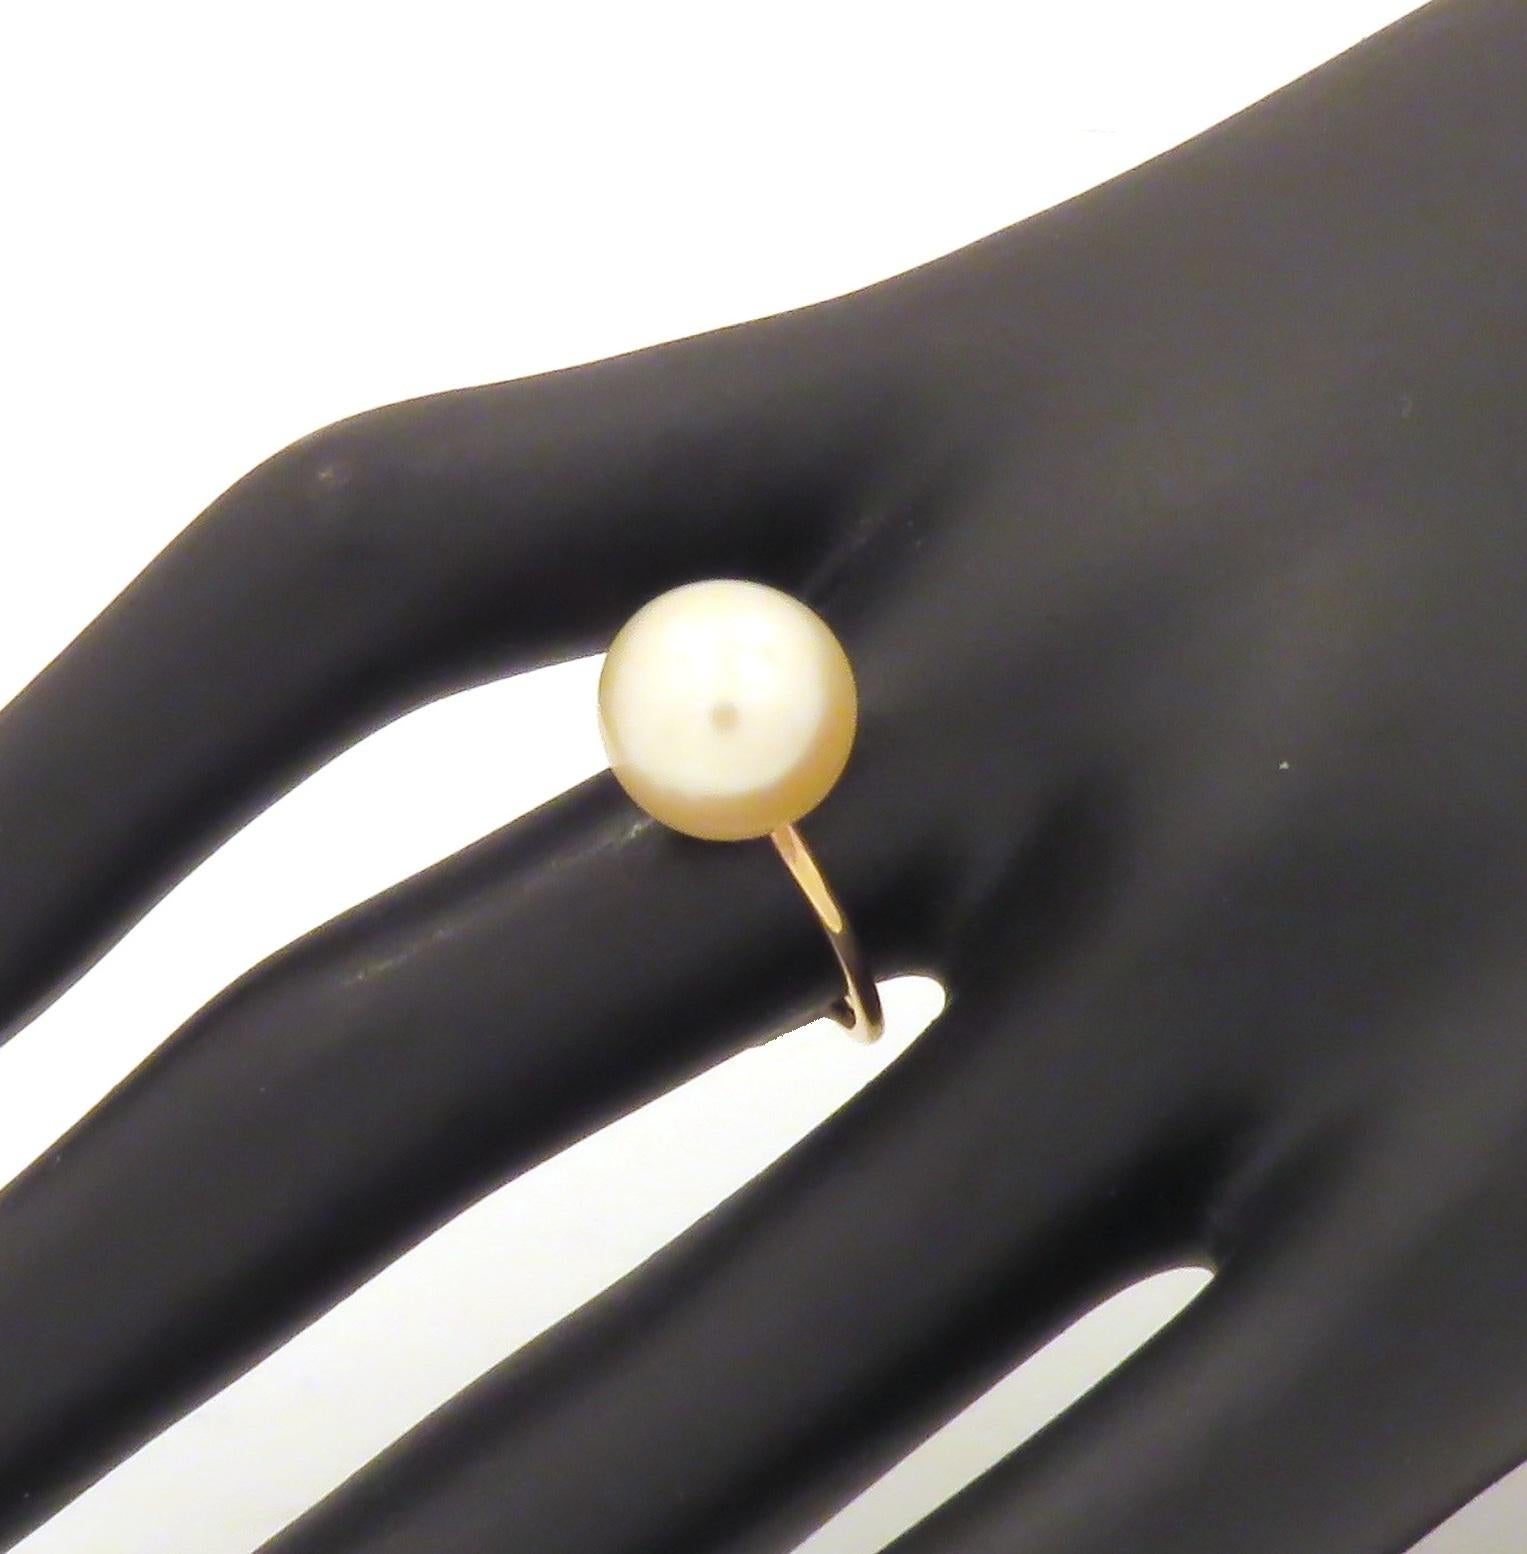 Very stylish modern ring crafted in 9k rose gold featuring a round natural white freshwater pearl. The diameter of the pearl is  11 millimeters / 0.433 inches. Us finger size is 7 / Italian size  15 / French size 55 . Adjustable to the customer's